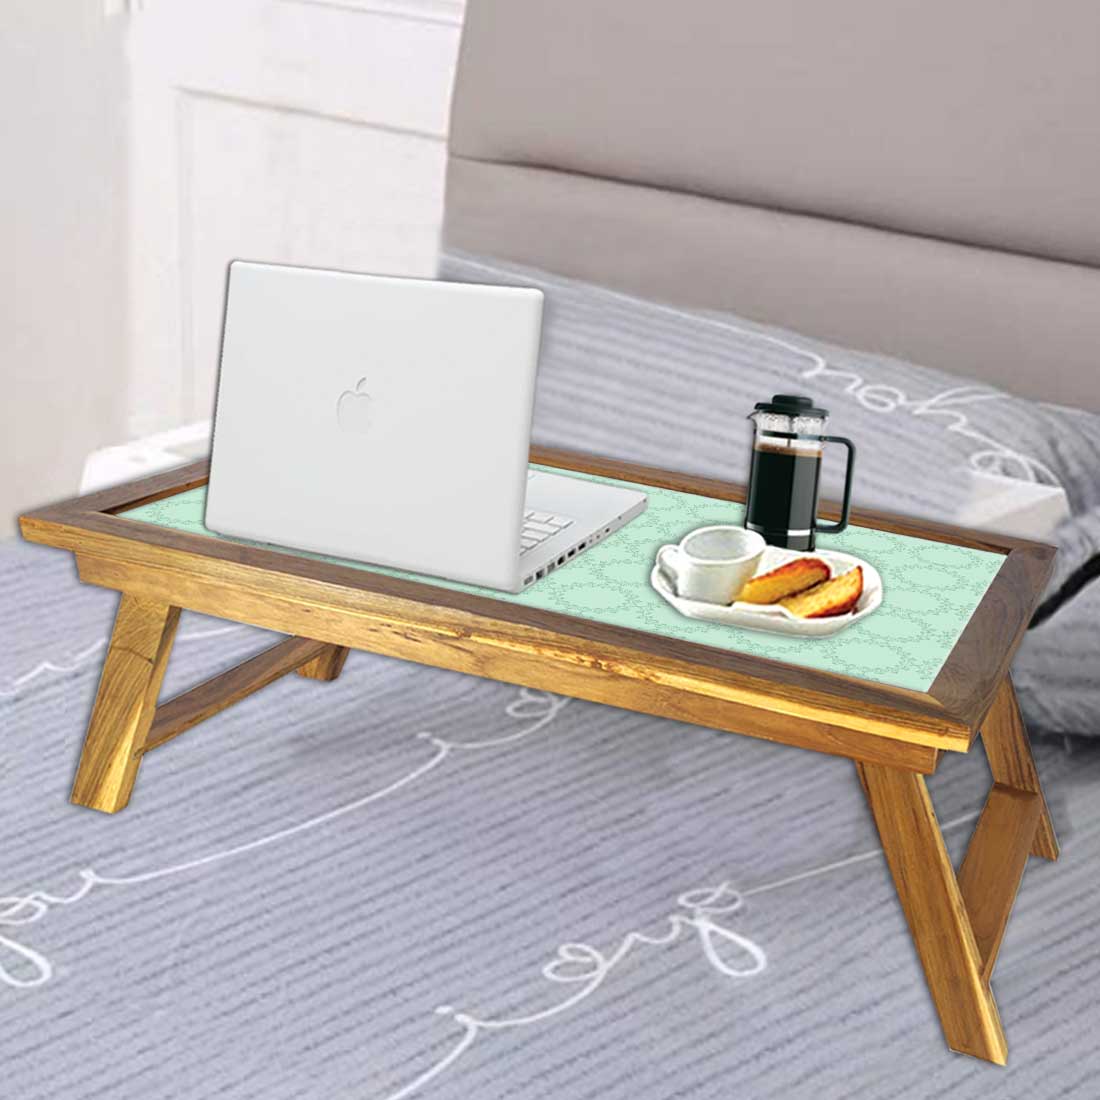 Nutcase Folding Laptop Table For Home Bed Lapdesk Breakfast Table Foldable Teak Wooden Study Desk - Green Pattern Circle Nutcase